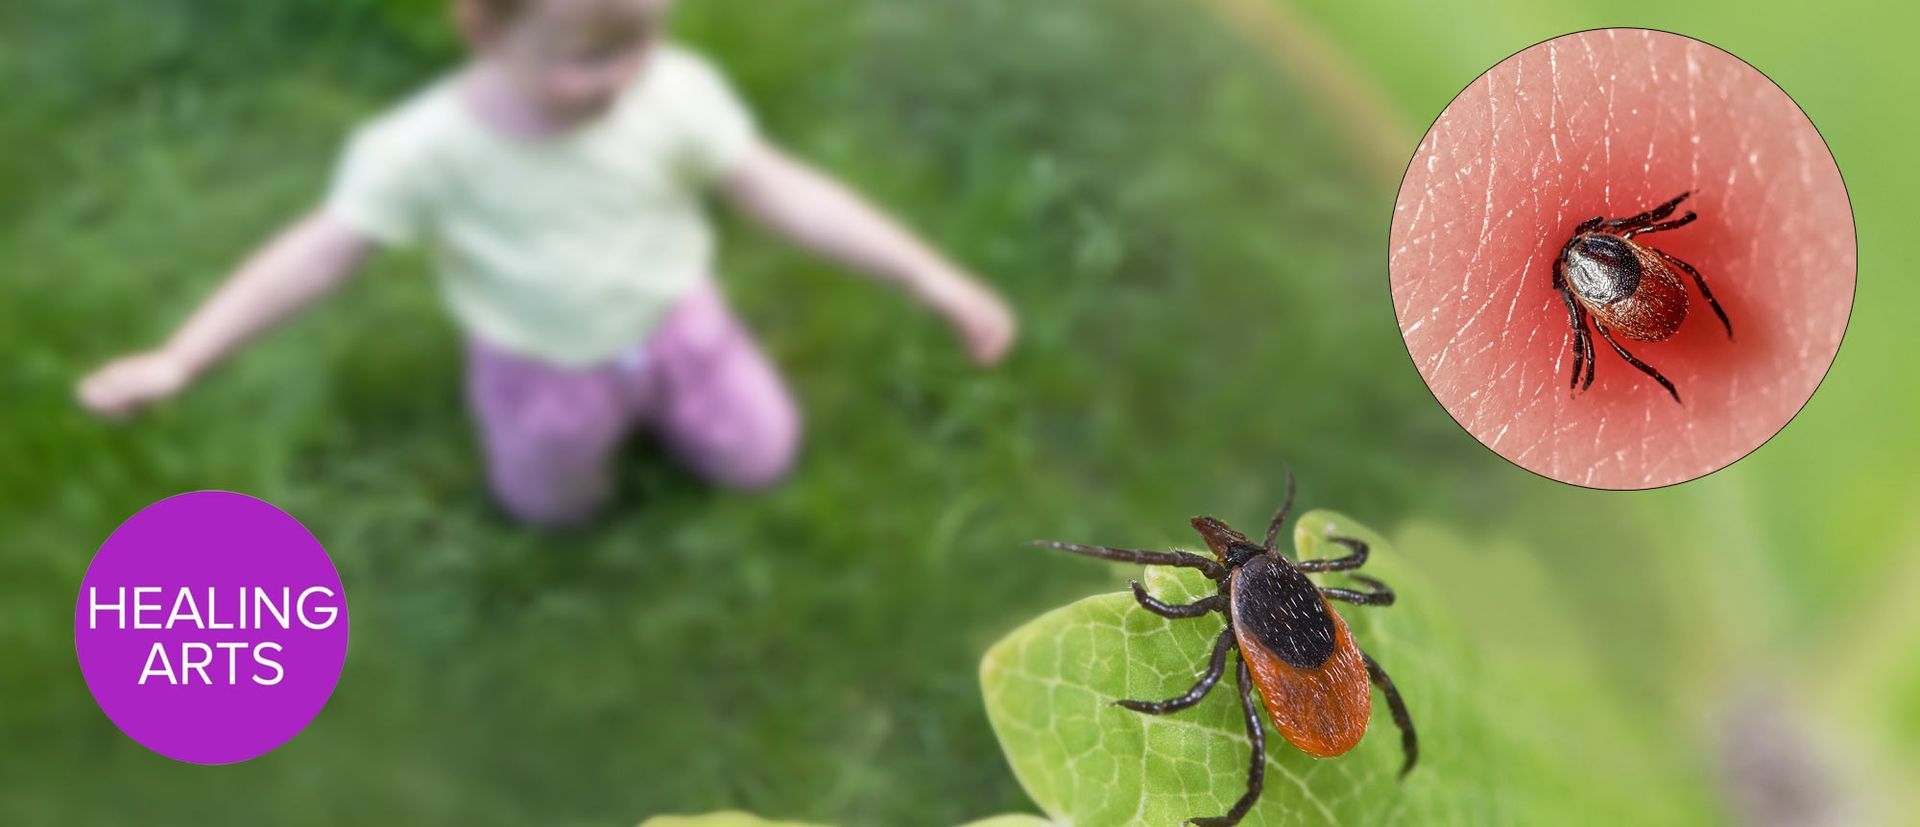 What You Should Know About Lyme Disease as the Season Approaches. Learn About Holistic Treatment for Lyme Disease and Tips for Prevention from Dr. Alicia Armitstead